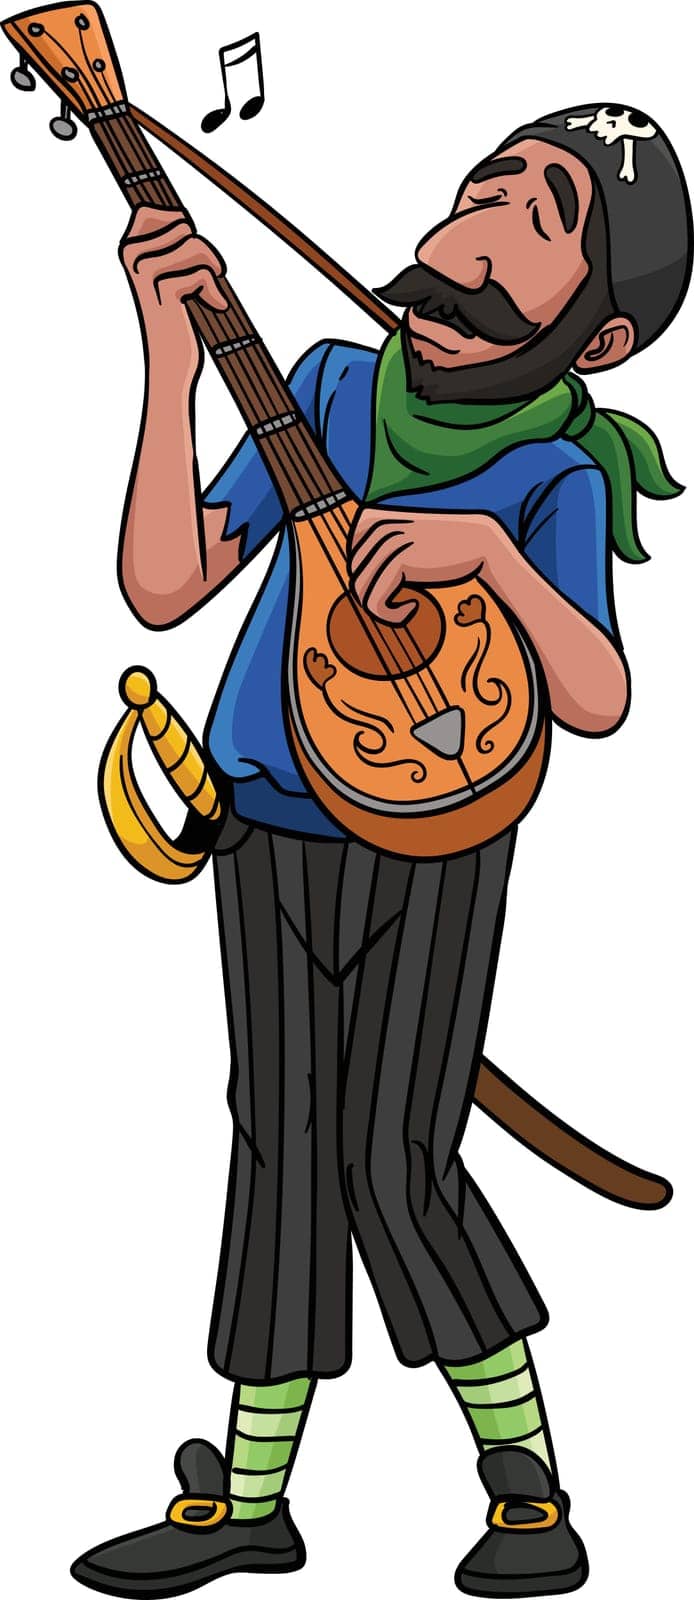 This cartoon clipart shows a Pirate with a Guitar illustration.